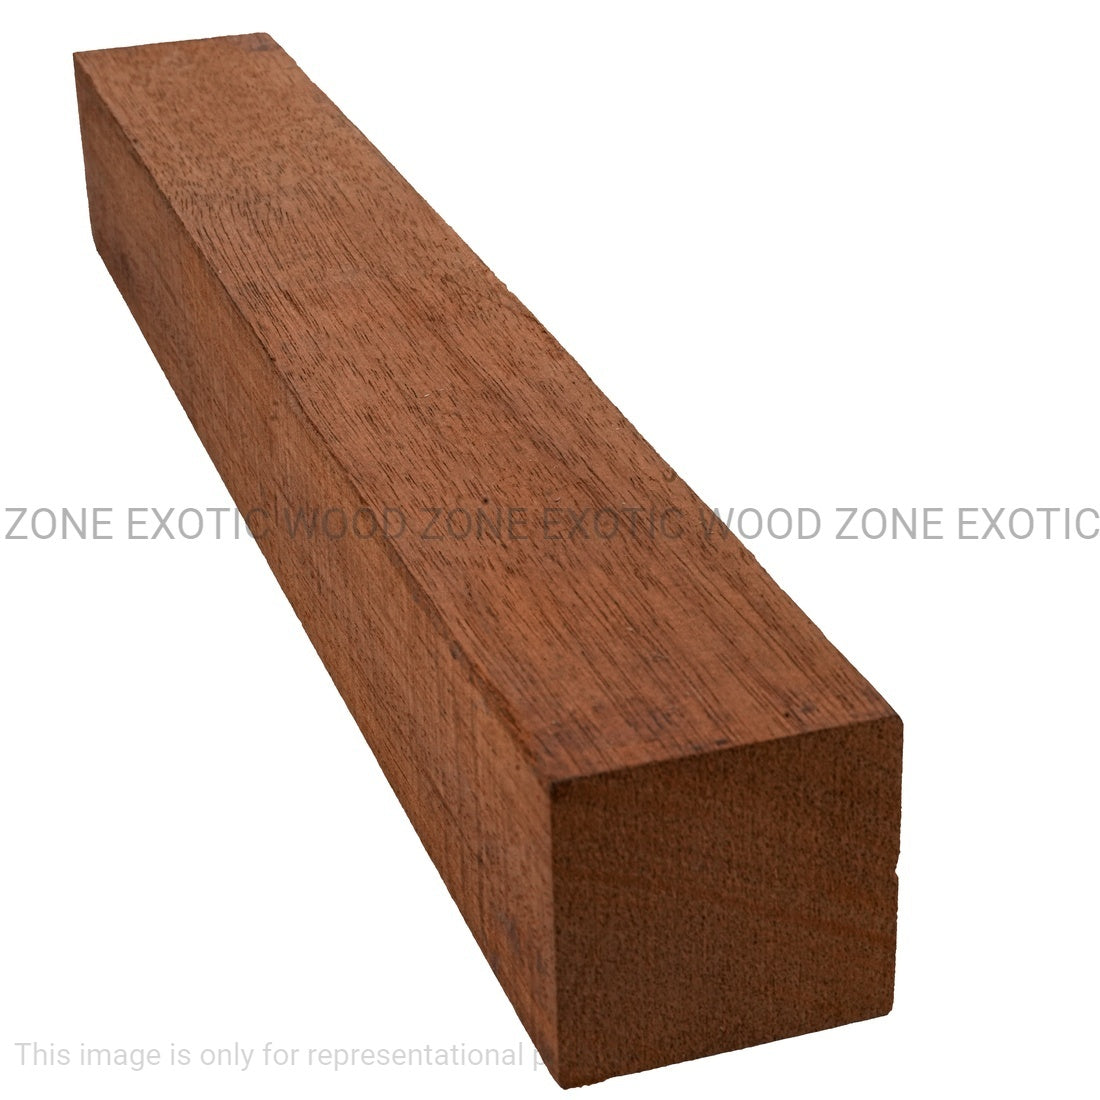 Pack Of 5, Honduran Mahogany Turning Blanks 2&quot; x 2&quot; - Exotic Wood Zone - Buy online Across USA 